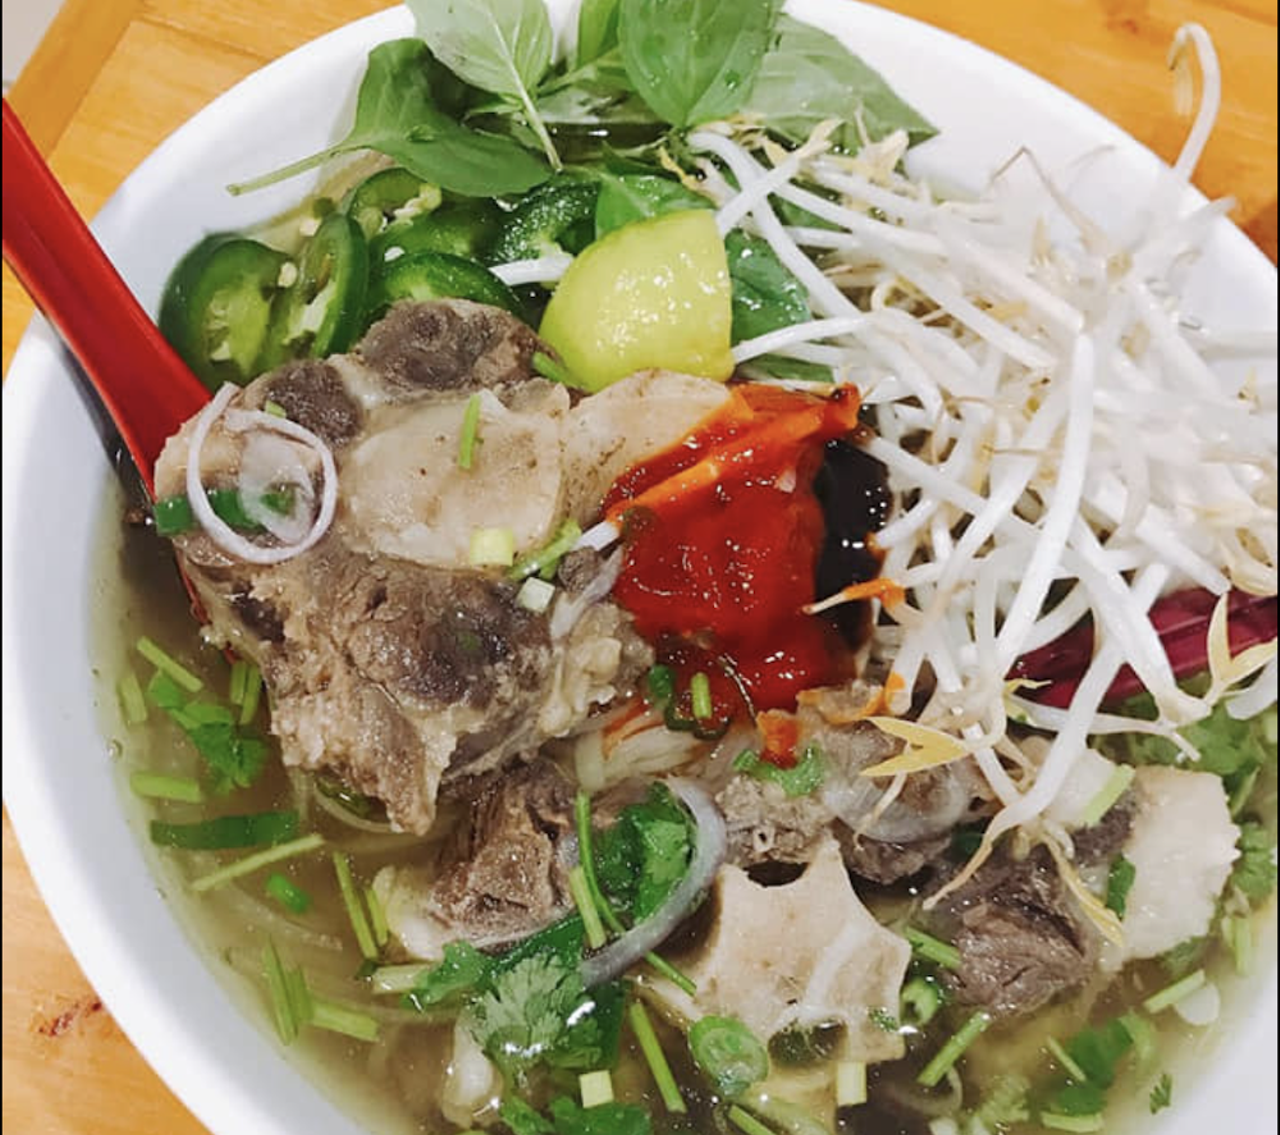 Pho Loc Tho
11262 Boyette Rd., Riverview, 813-570-6163
The Vietnamese restaurant carries pho steaming hot enough to warm the soul and specialty fresh spring rolls to cool you down.
Photo via Pho Loc Tho/Facebook